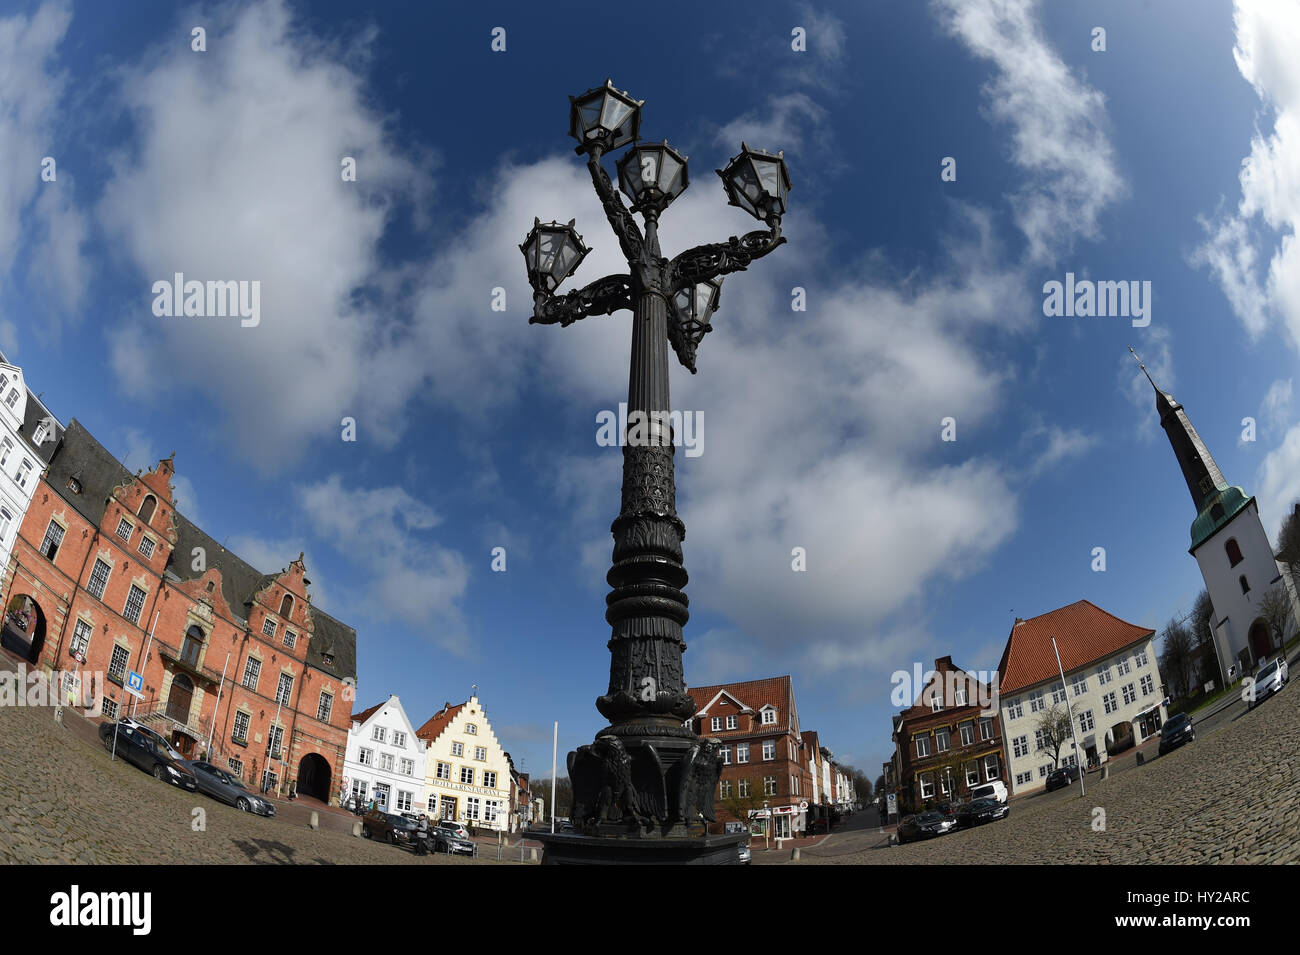 Glueckstadt, Germany. 15th Mar, 2017. View of the market square of Glueckstadt, Germany, 15 March 2017. The town celebrated its 400th anniversary with a festival on 25 March. Photo: Carsten Rehder/dpa/Alamy Live News Stock Photo